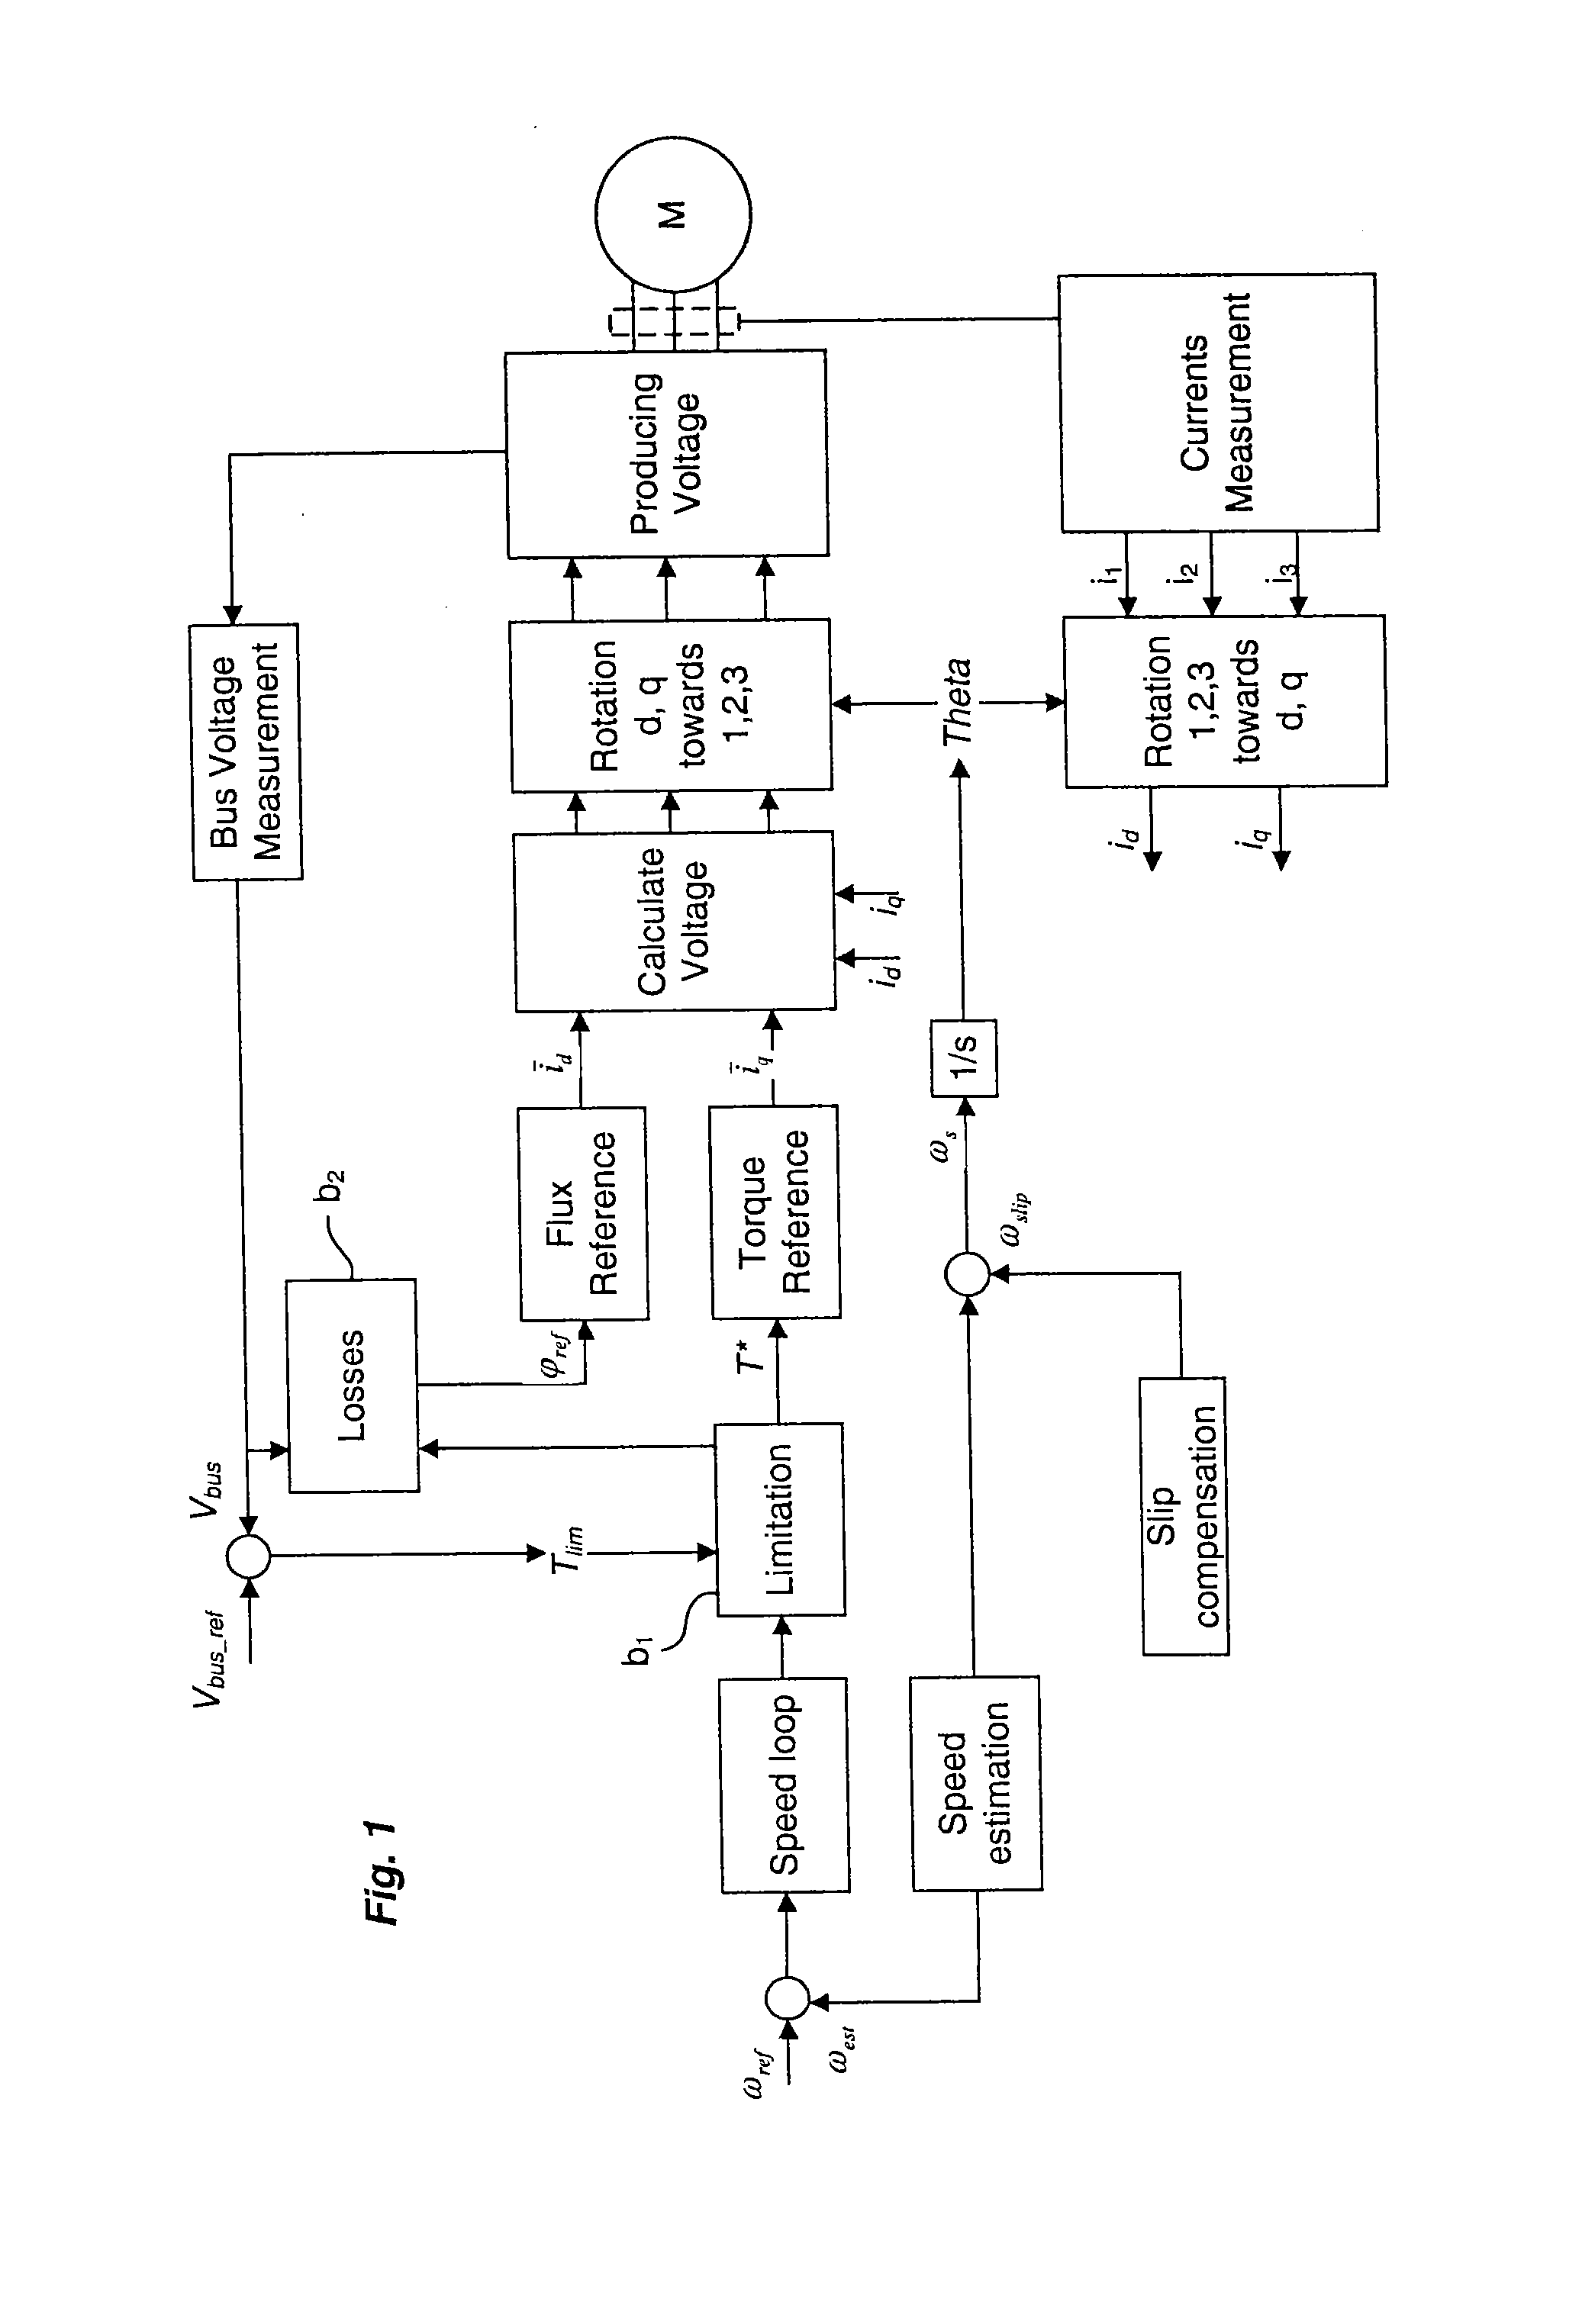 Method of control implemented in a variable speed drive for controlling the deceleration of an electric motor in the case of power outage